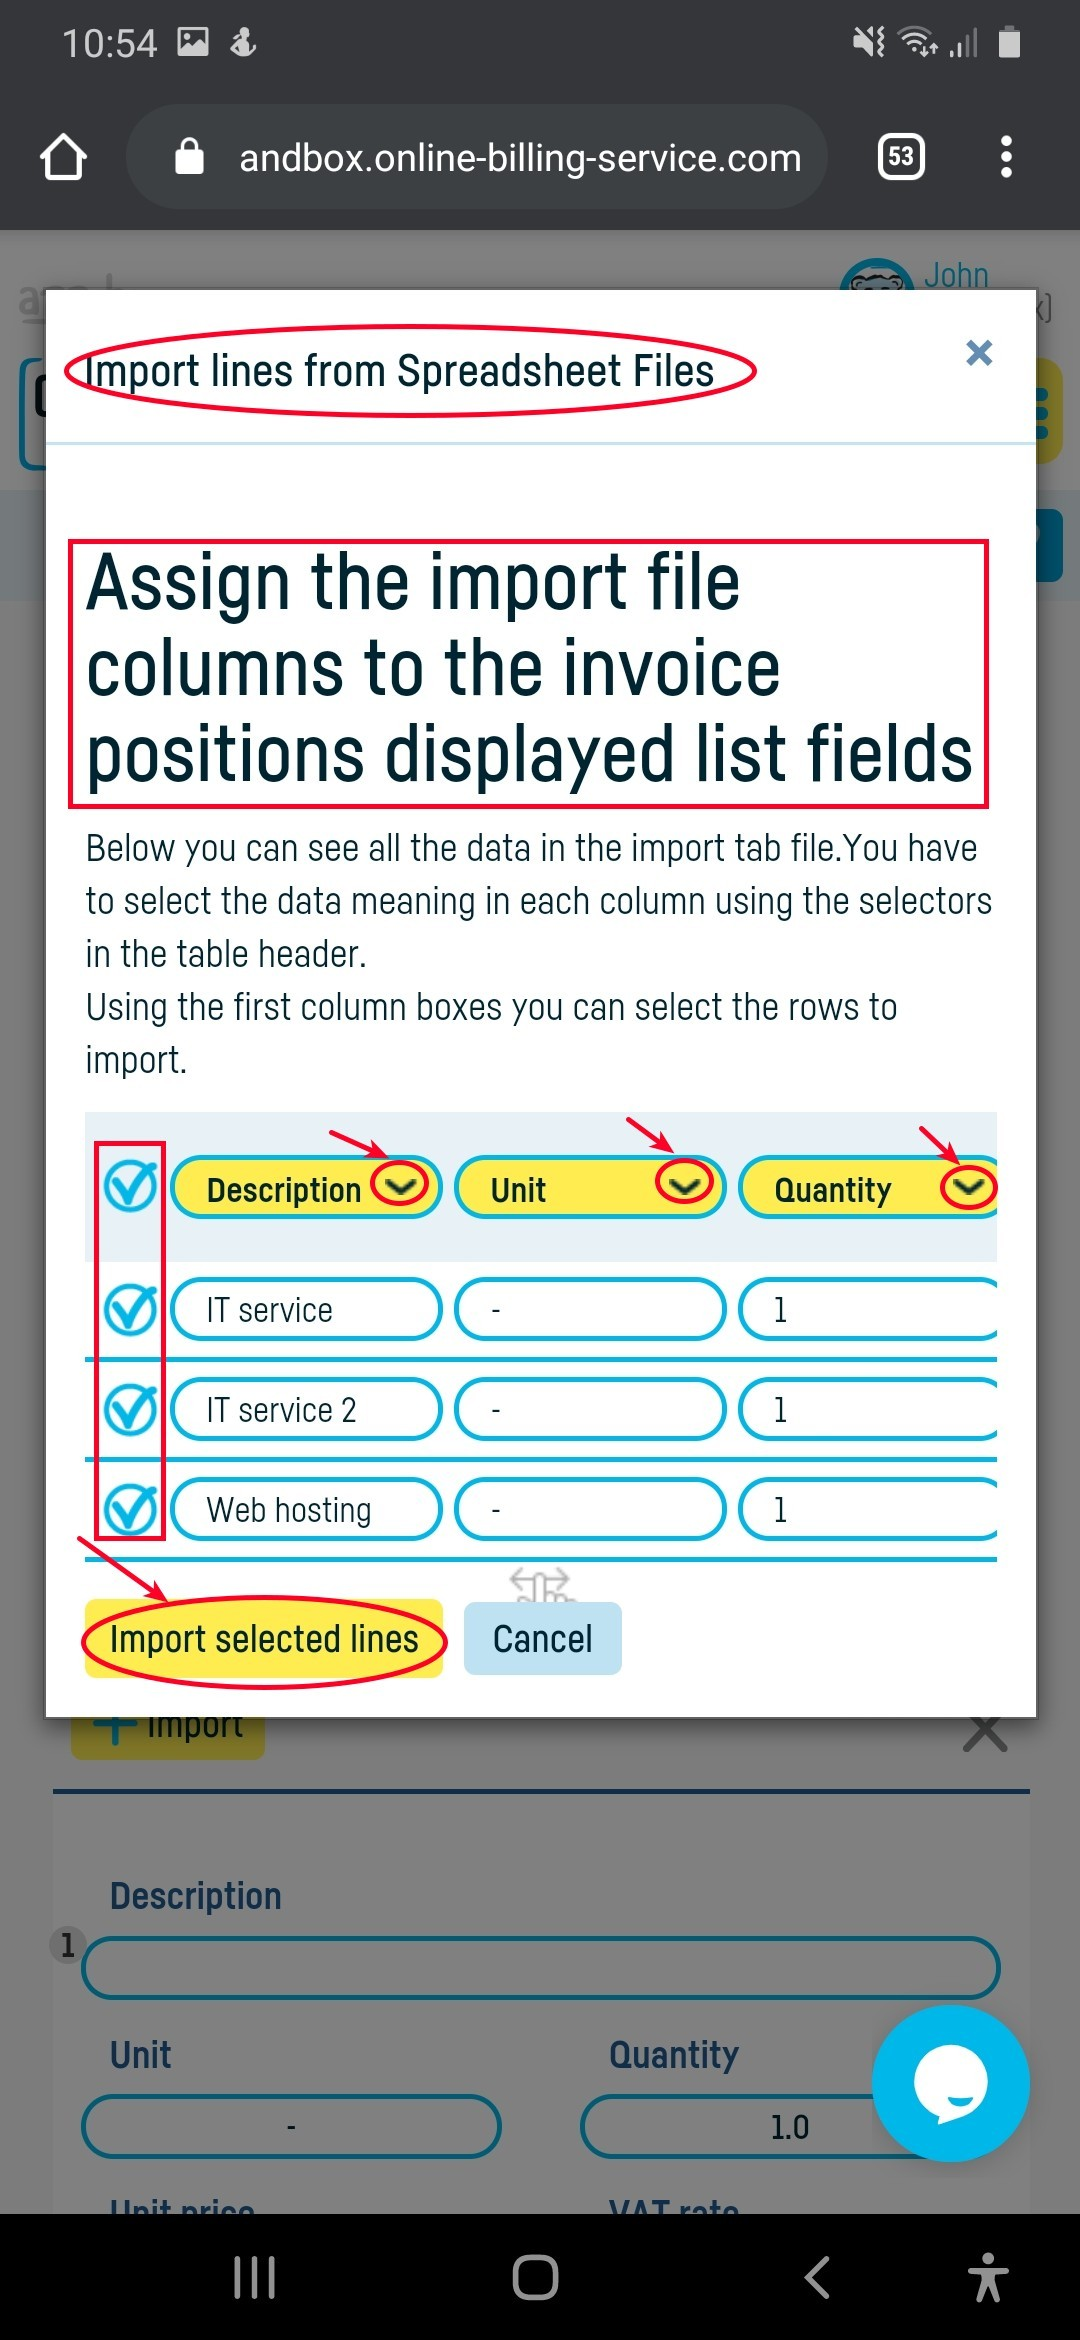 Import lines from documents into your invoice - step 4